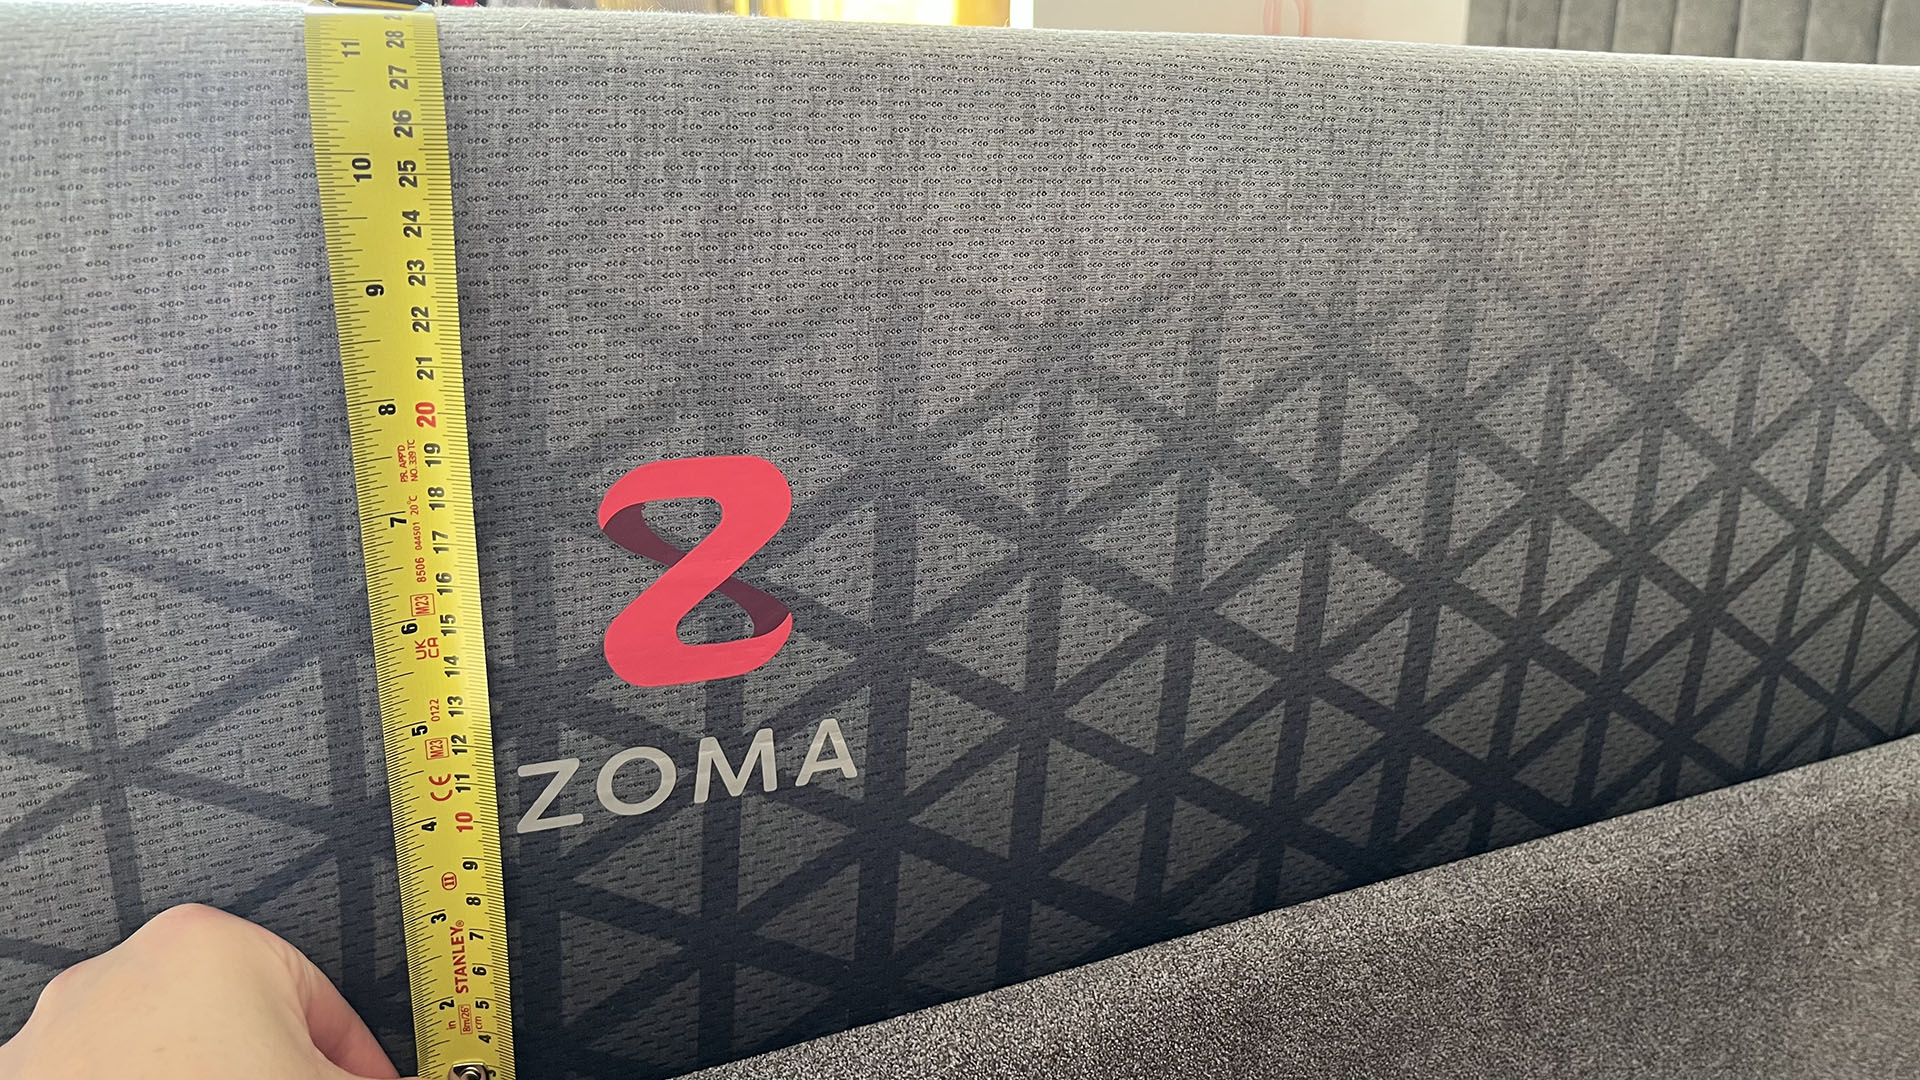 Zoma Hybrid with tape measure showing depth of mattress